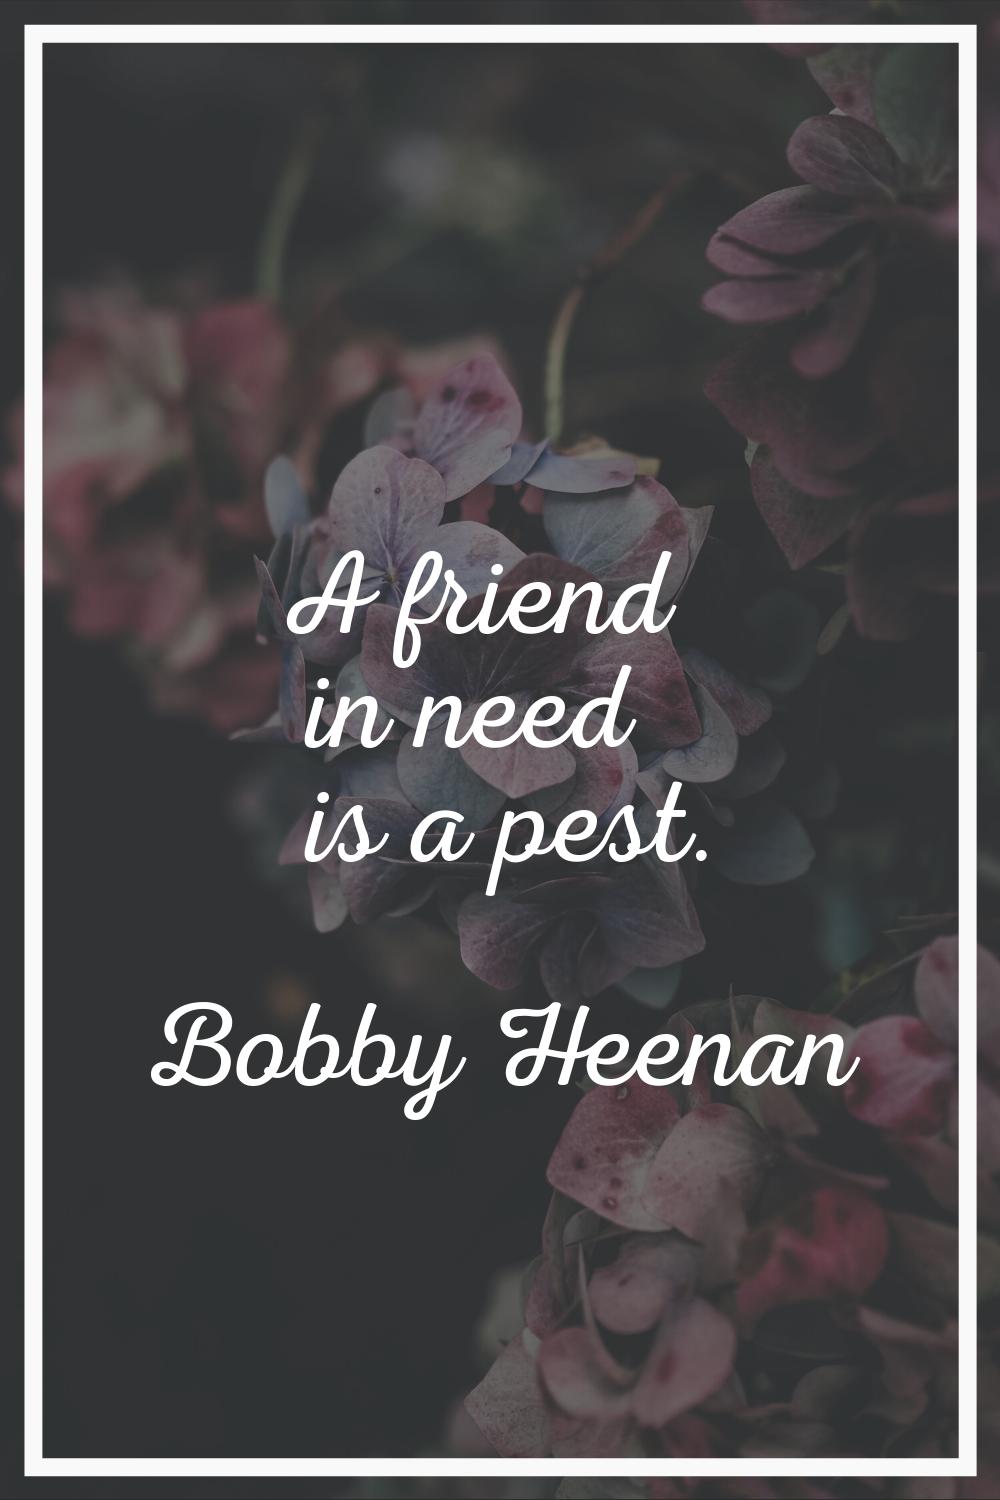 A friend in need is a pest.